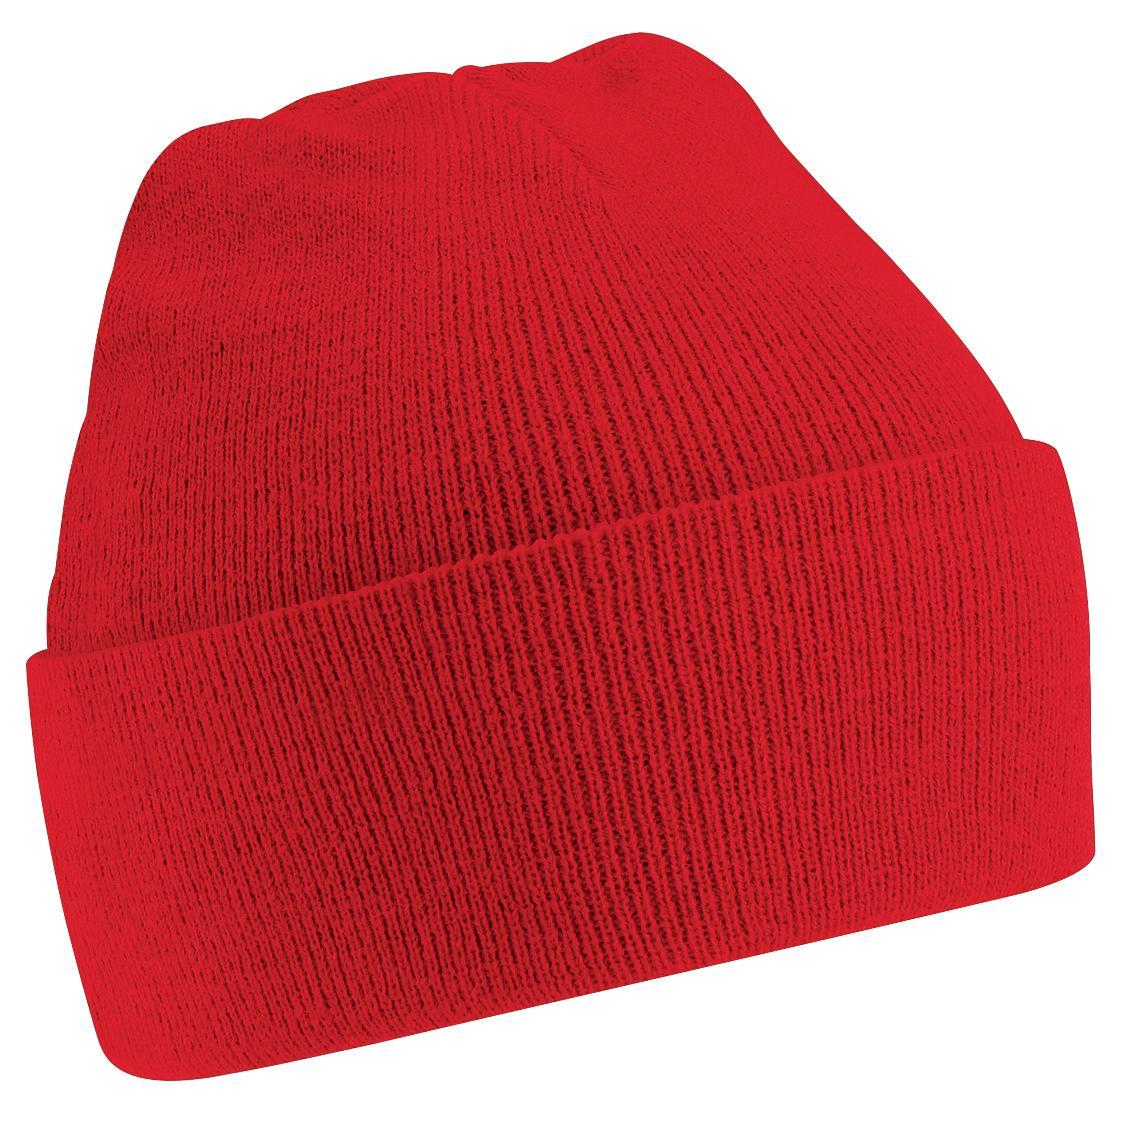 Beechfield Unisex Junior Kids Knitted Soft Touch Winter Hat (Classic Red) (One Size)